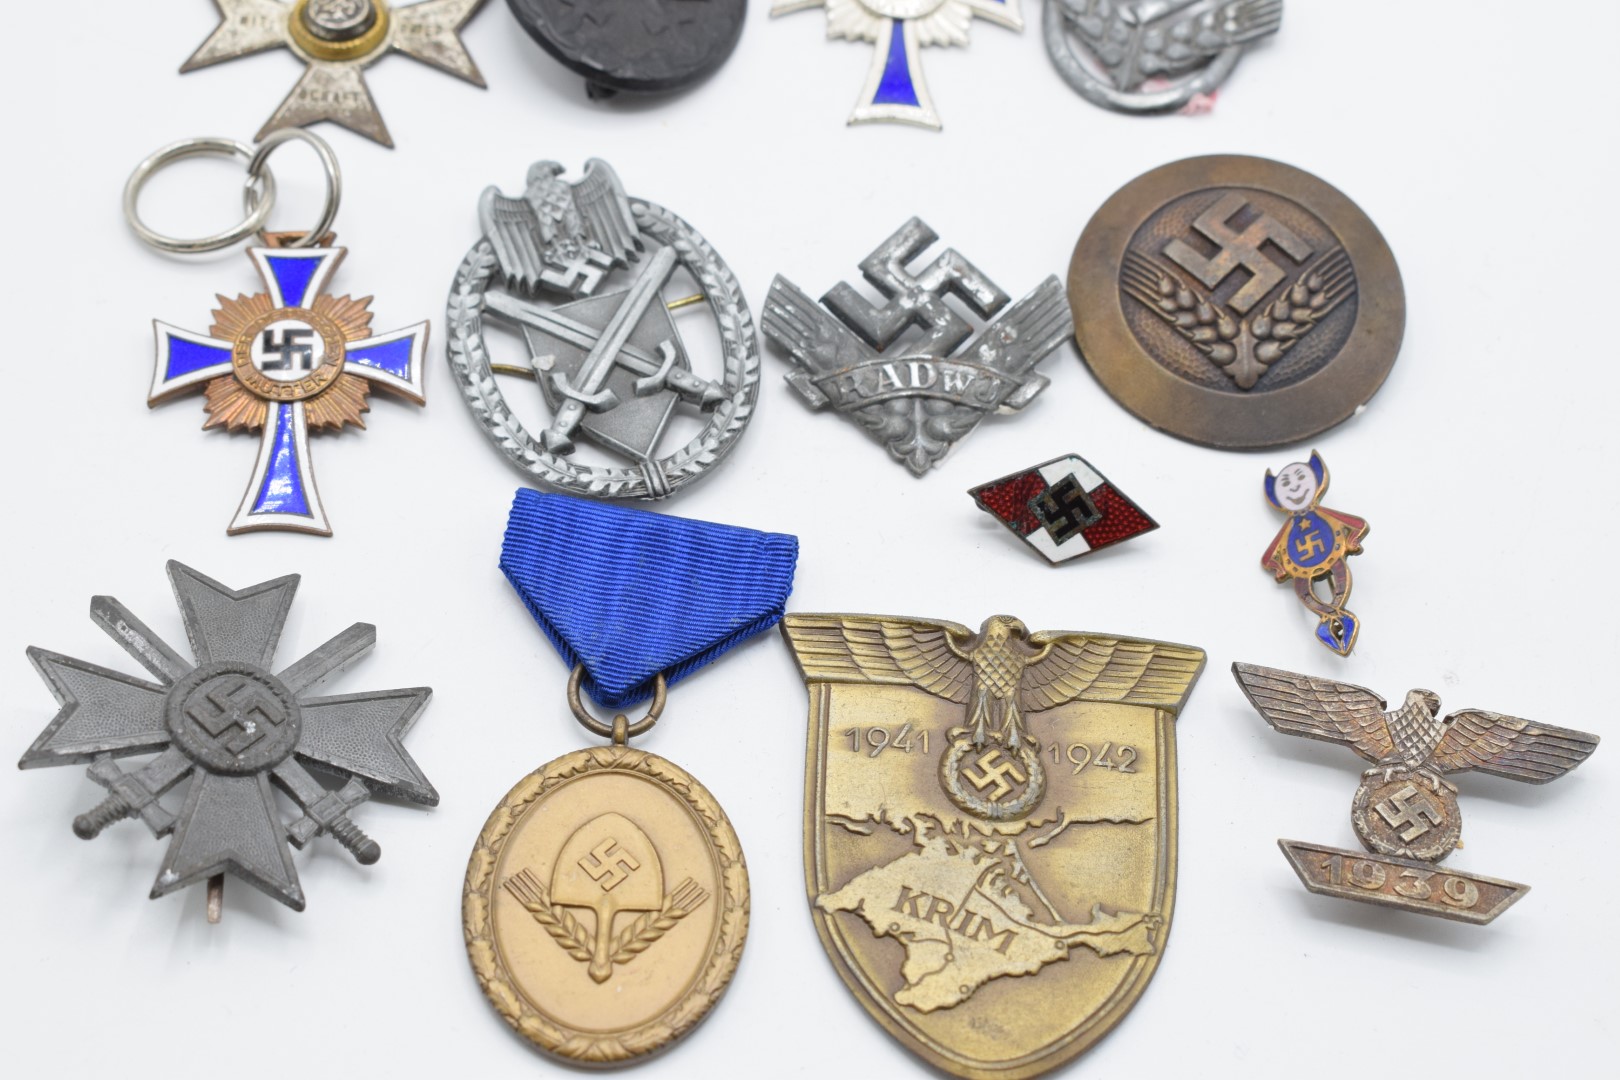 German Third Reich Nazi badges including a cloth Luftwaffe badge, Hitler Youth pin back enamel - Image 2 of 4